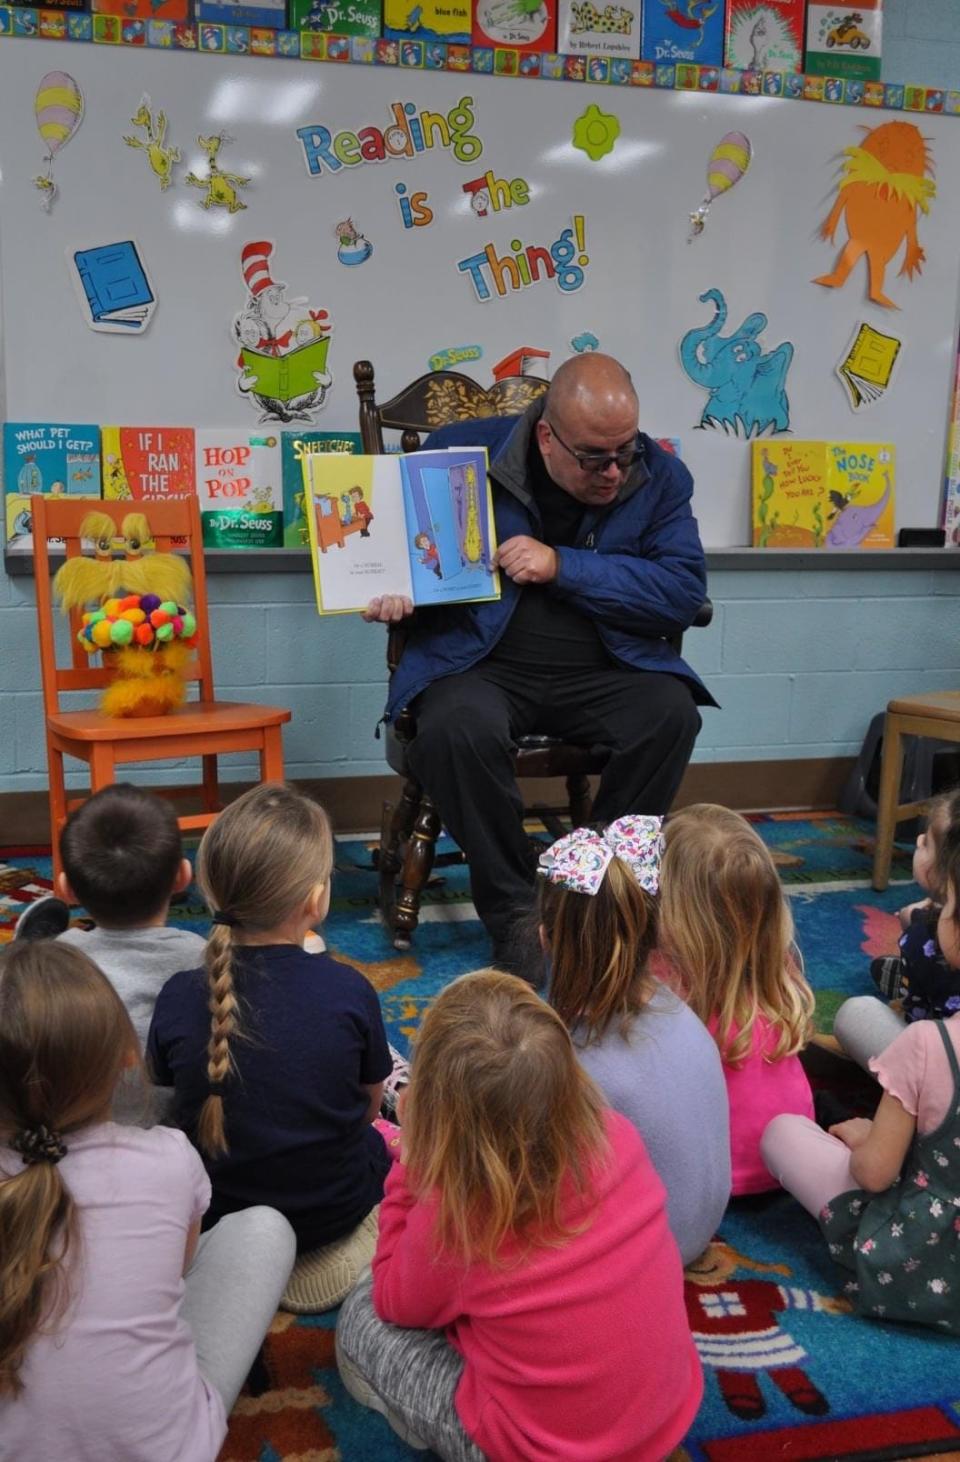 Fr. Jeff Coning read Dr. Seuss’s "There’s a Wocket in my Pocket."